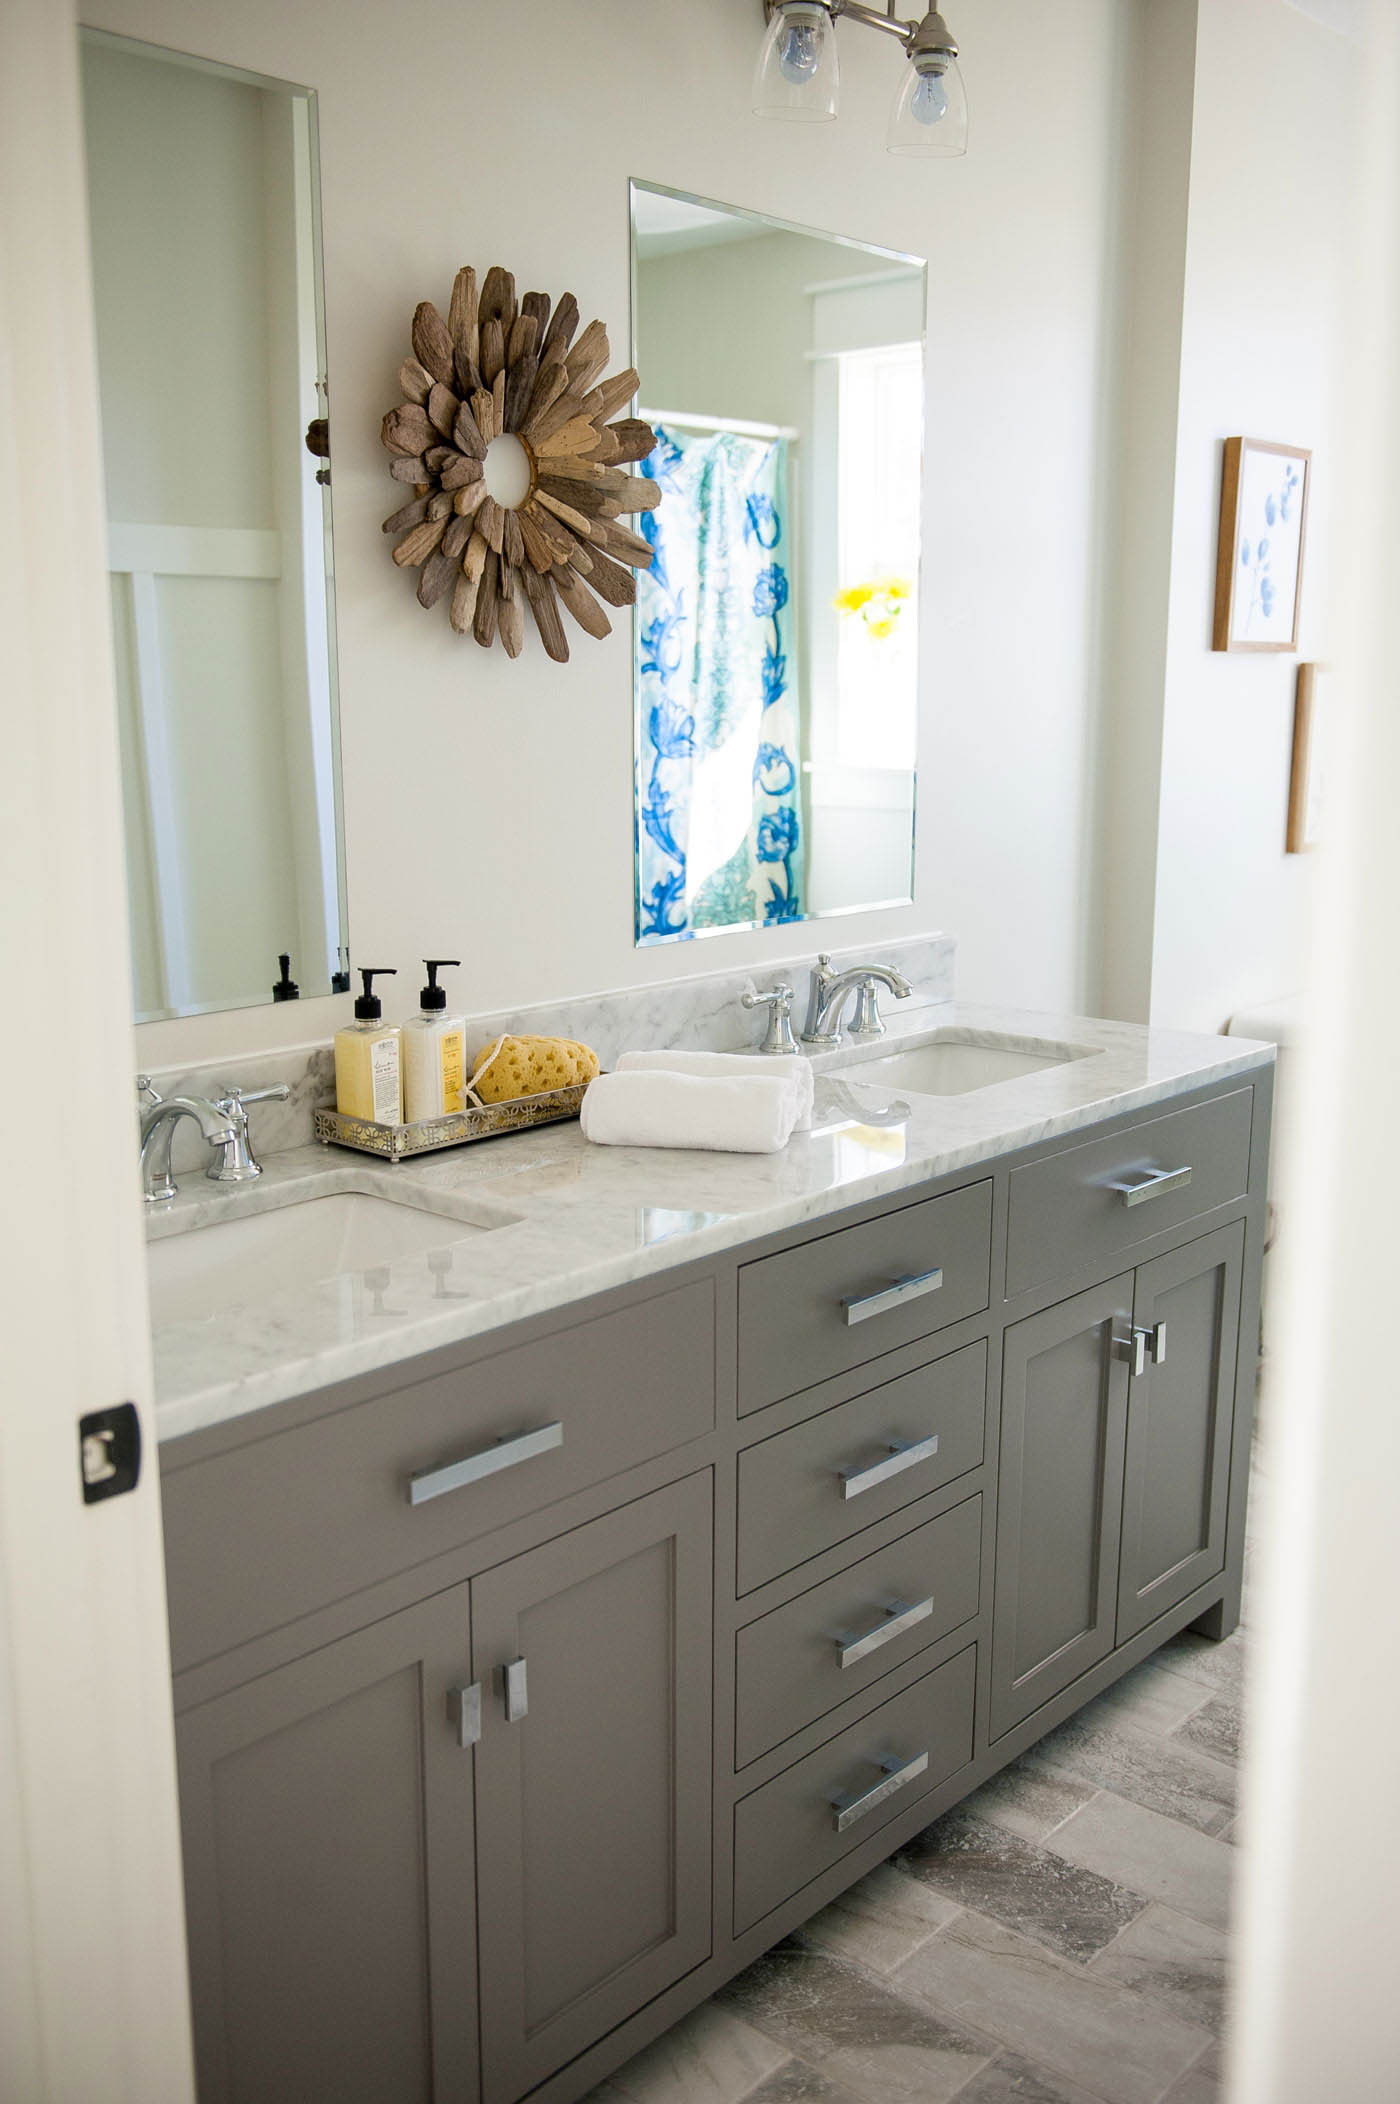 Bathroom Double Vanity Cabinets
 The Ultimate Guide to Buying a Bathroom Vanity